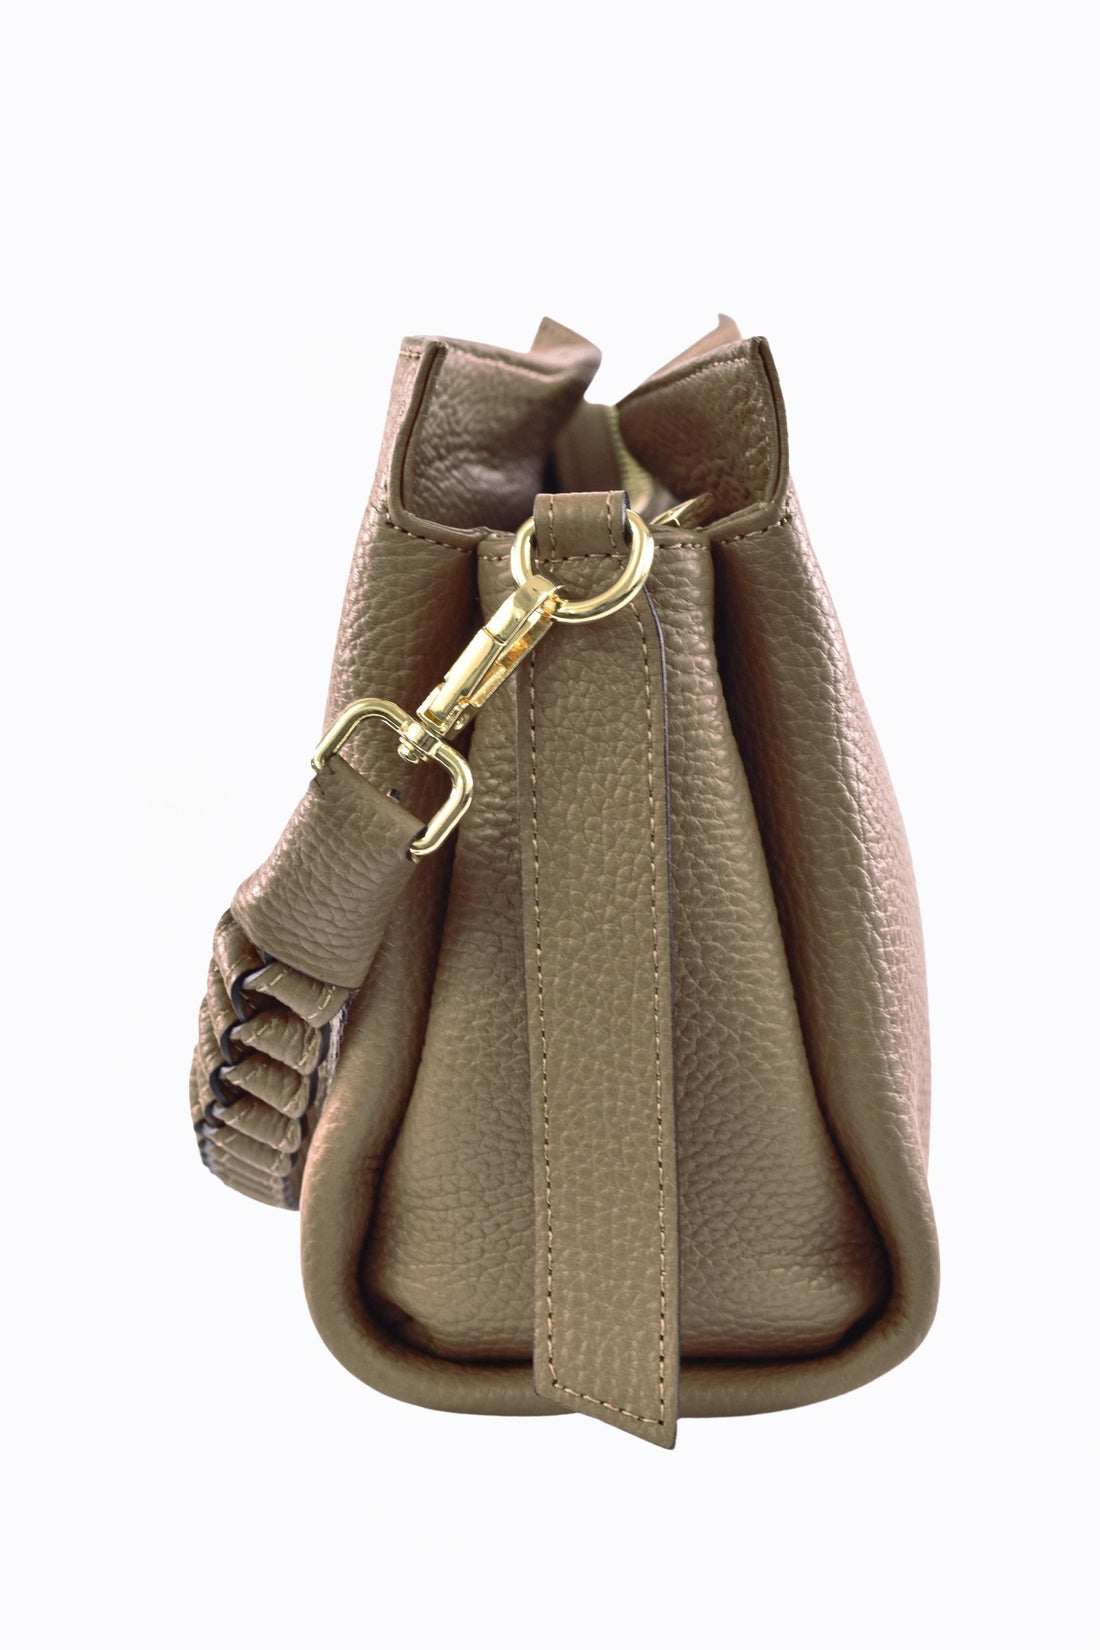 Braid Micro bag in Taupe Dollar leather